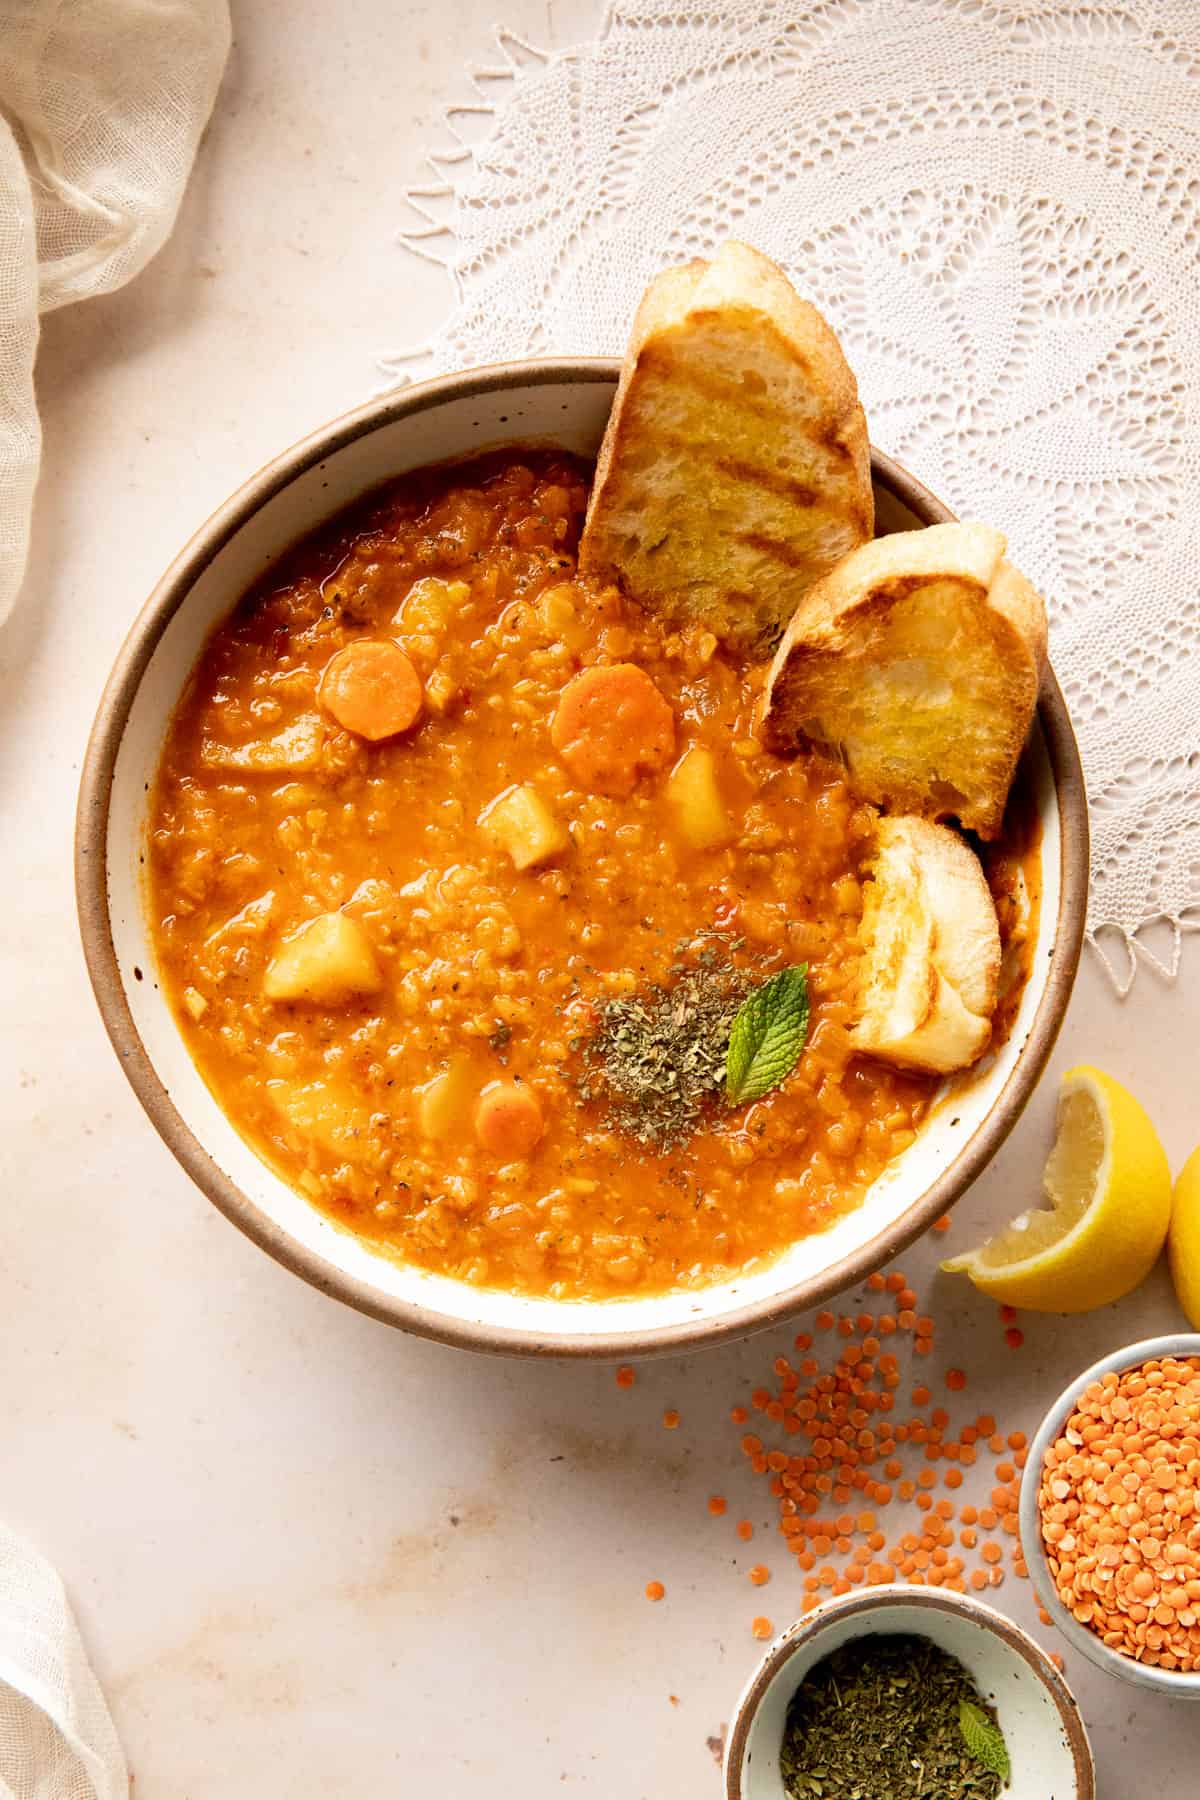 red lentil soup with lemon, red lentils, mint, and toasted bread